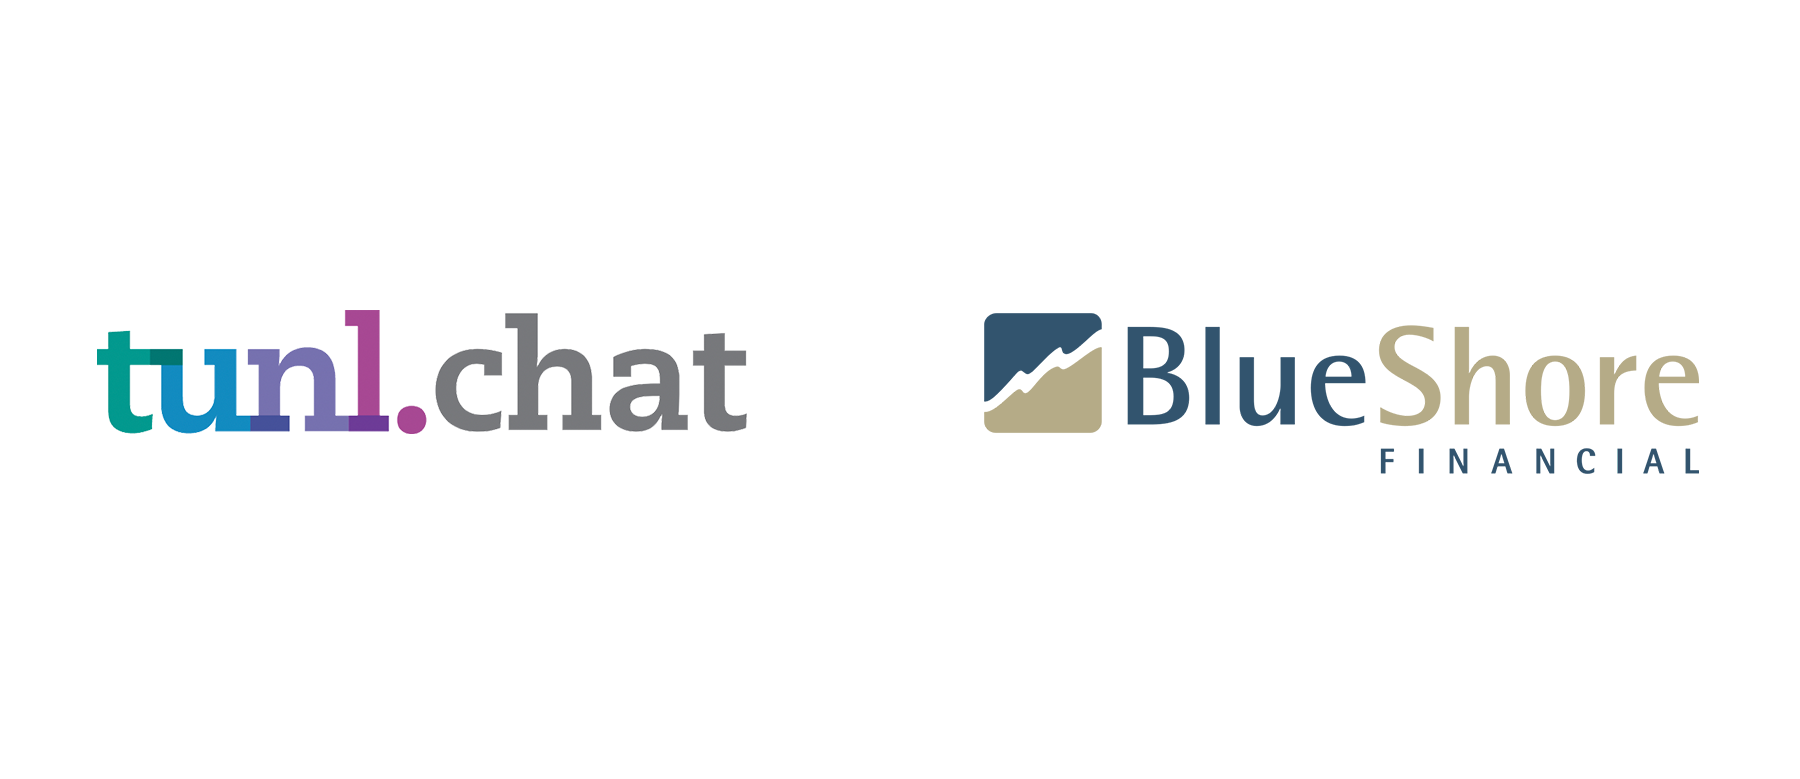 BlueShore Financial Slated to Implement FICANEX’s tunl. Chatbot this Year